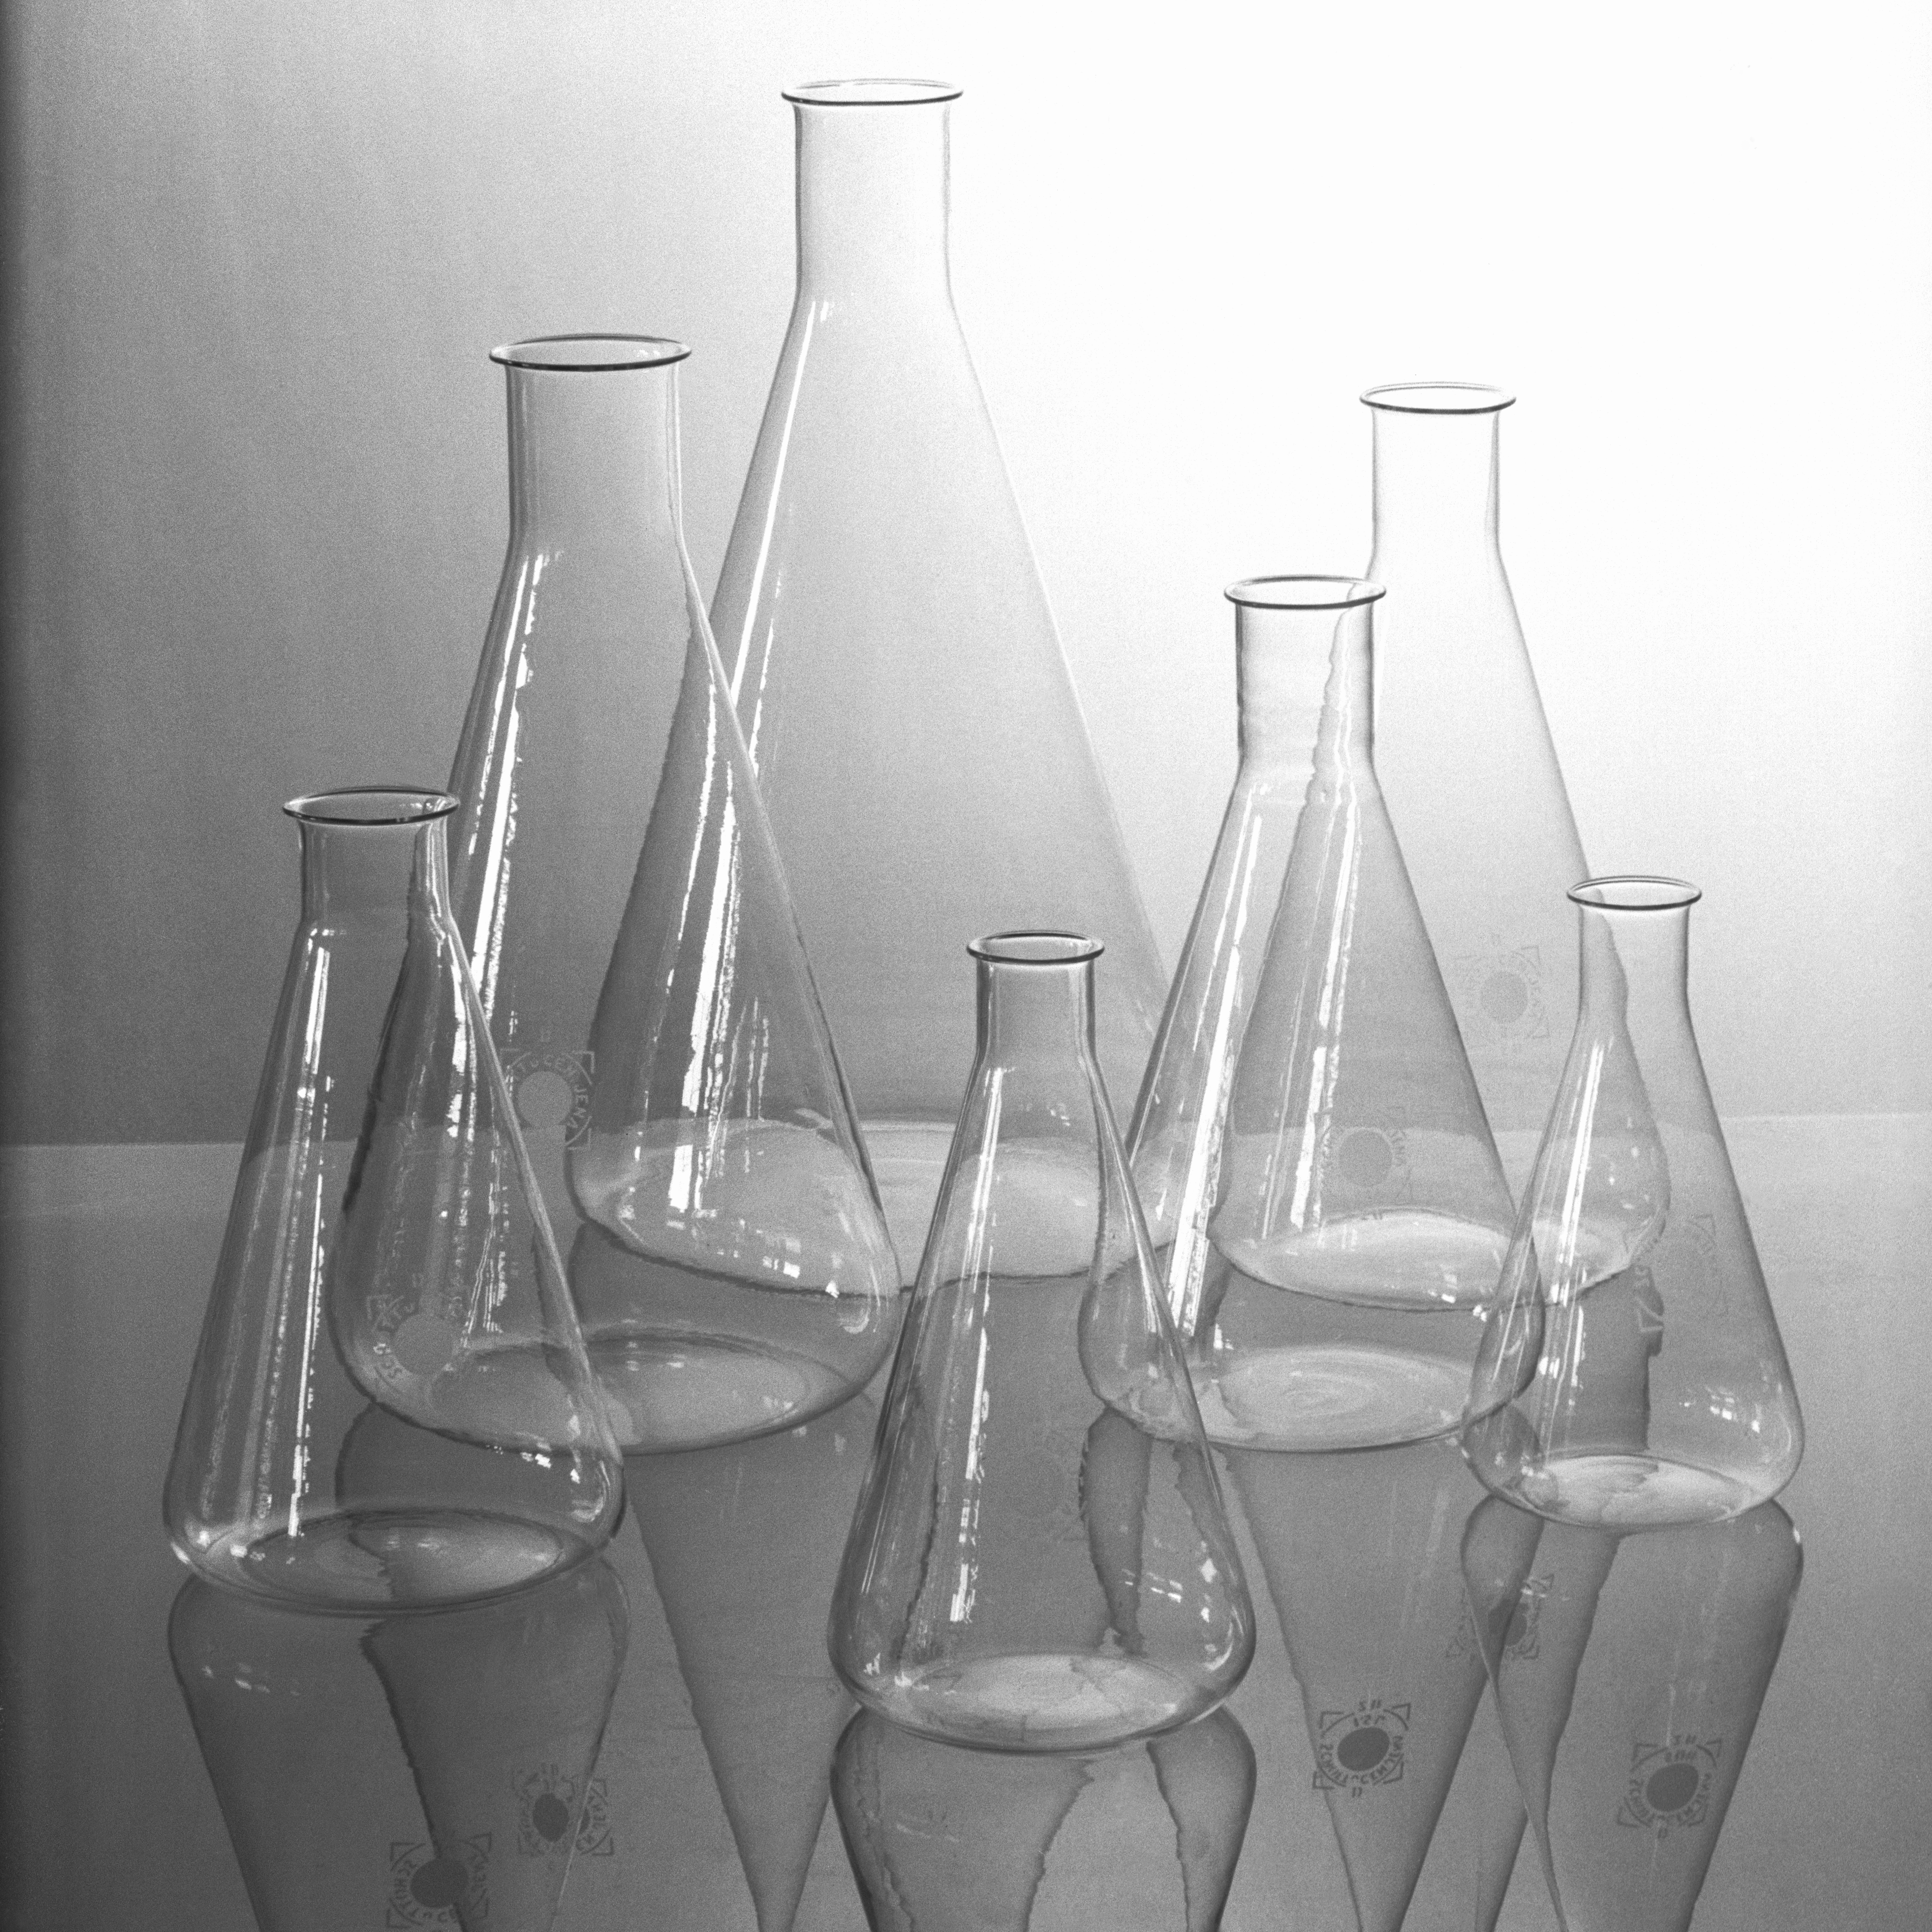 Selection of clear glass laboratory flasks	